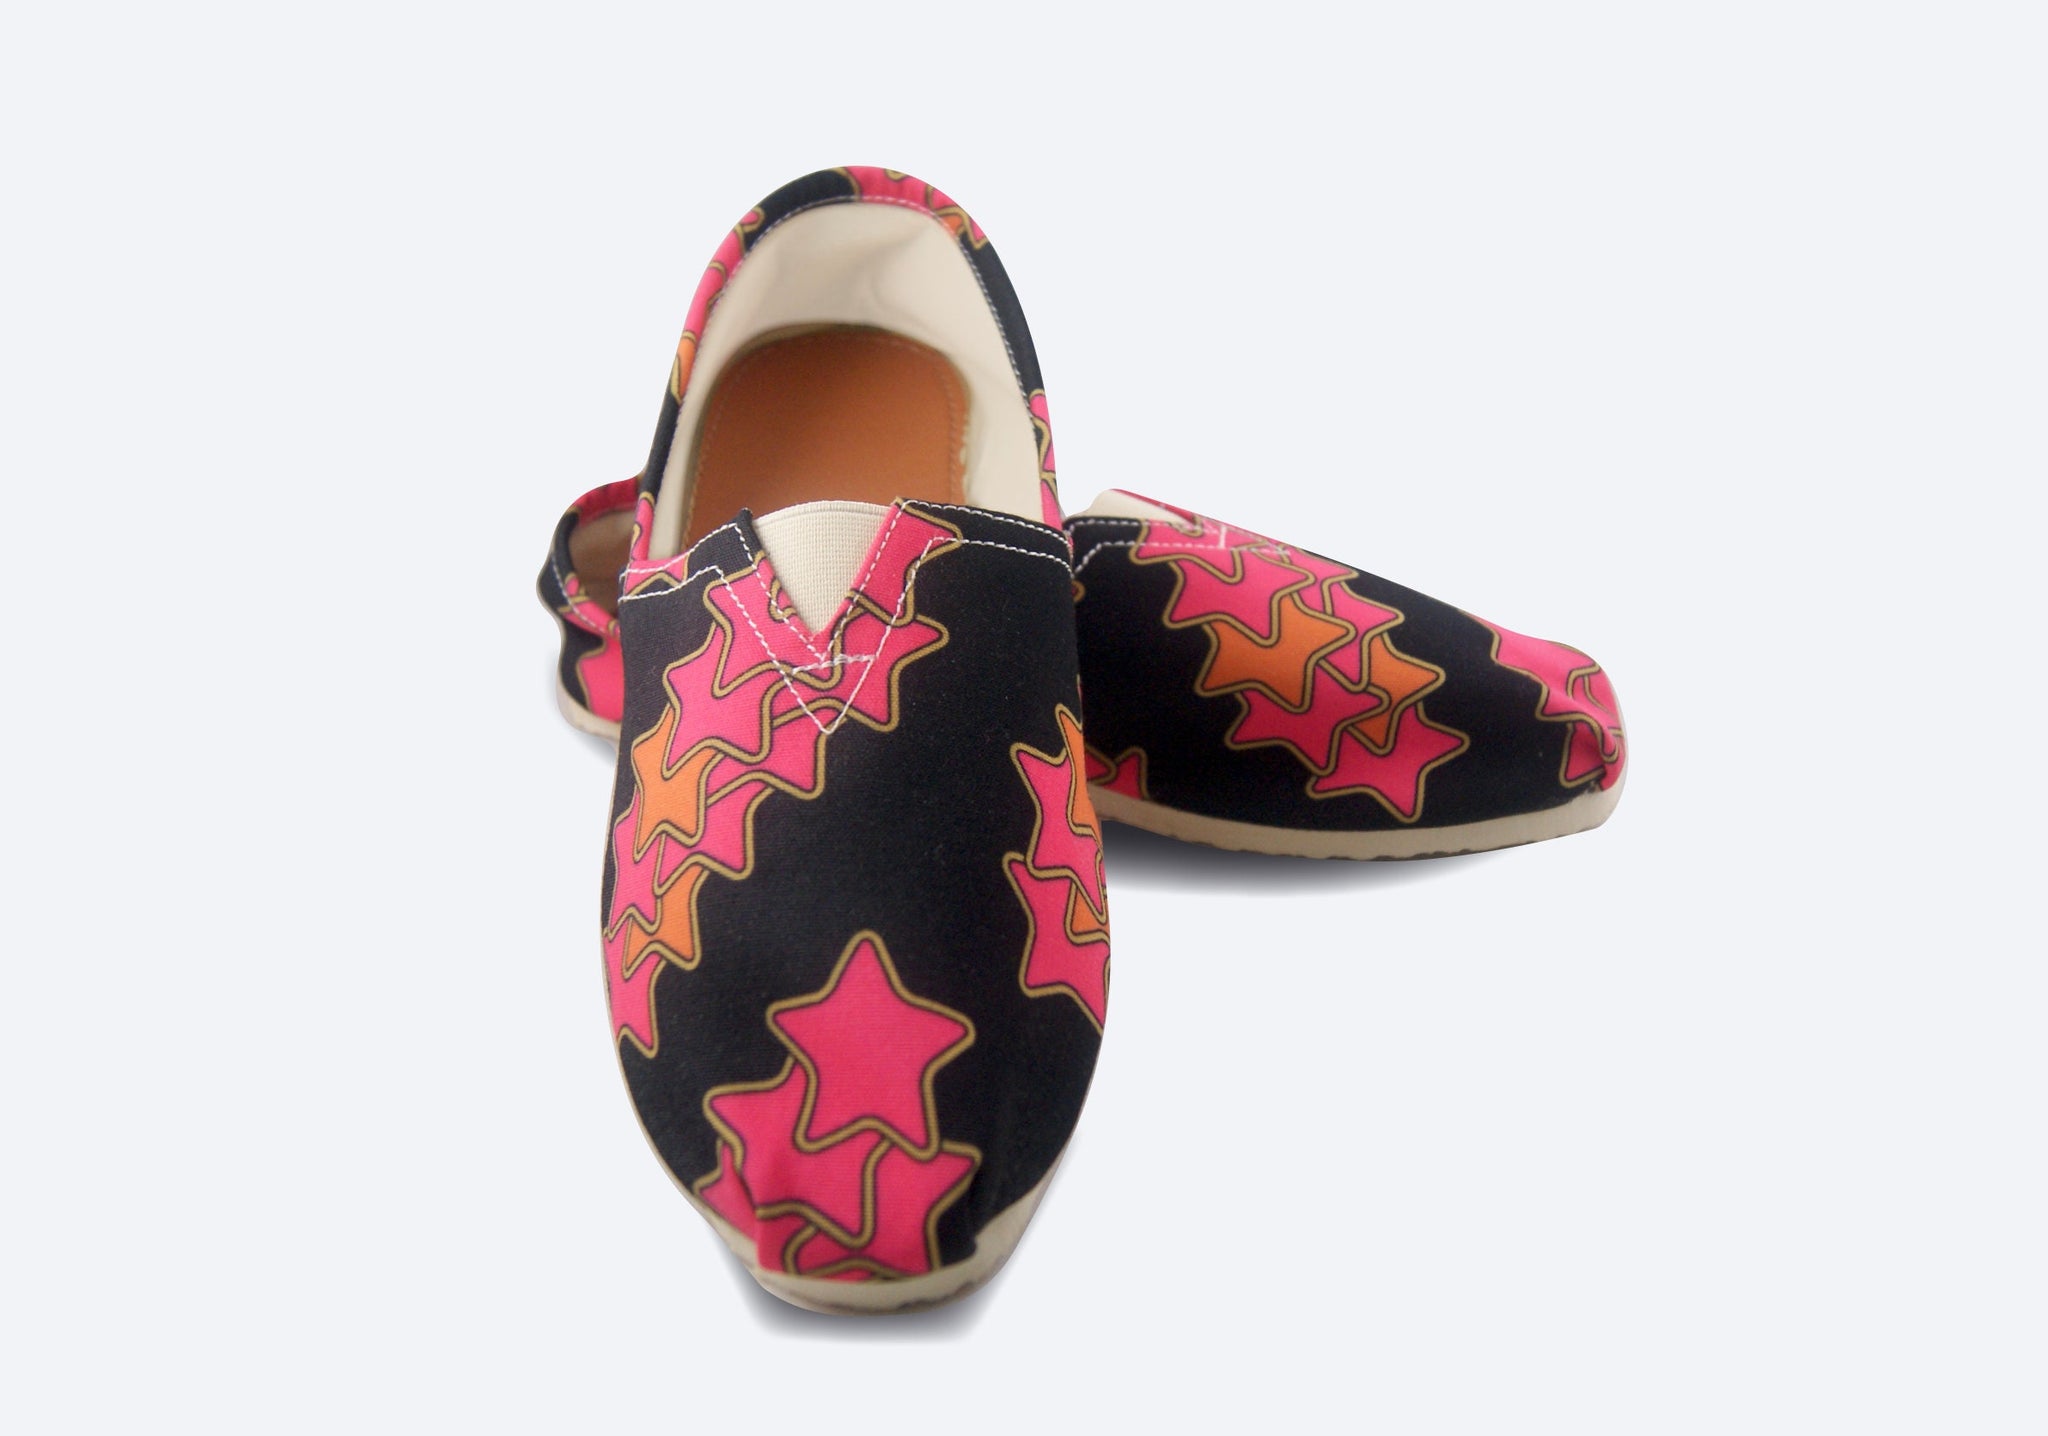 The Disco Starshower Flat | A Fabulous Shoe for Dazzling | Espadrille Style Loafer with a Groovy Black and Pink Star Print | Goose Taffy